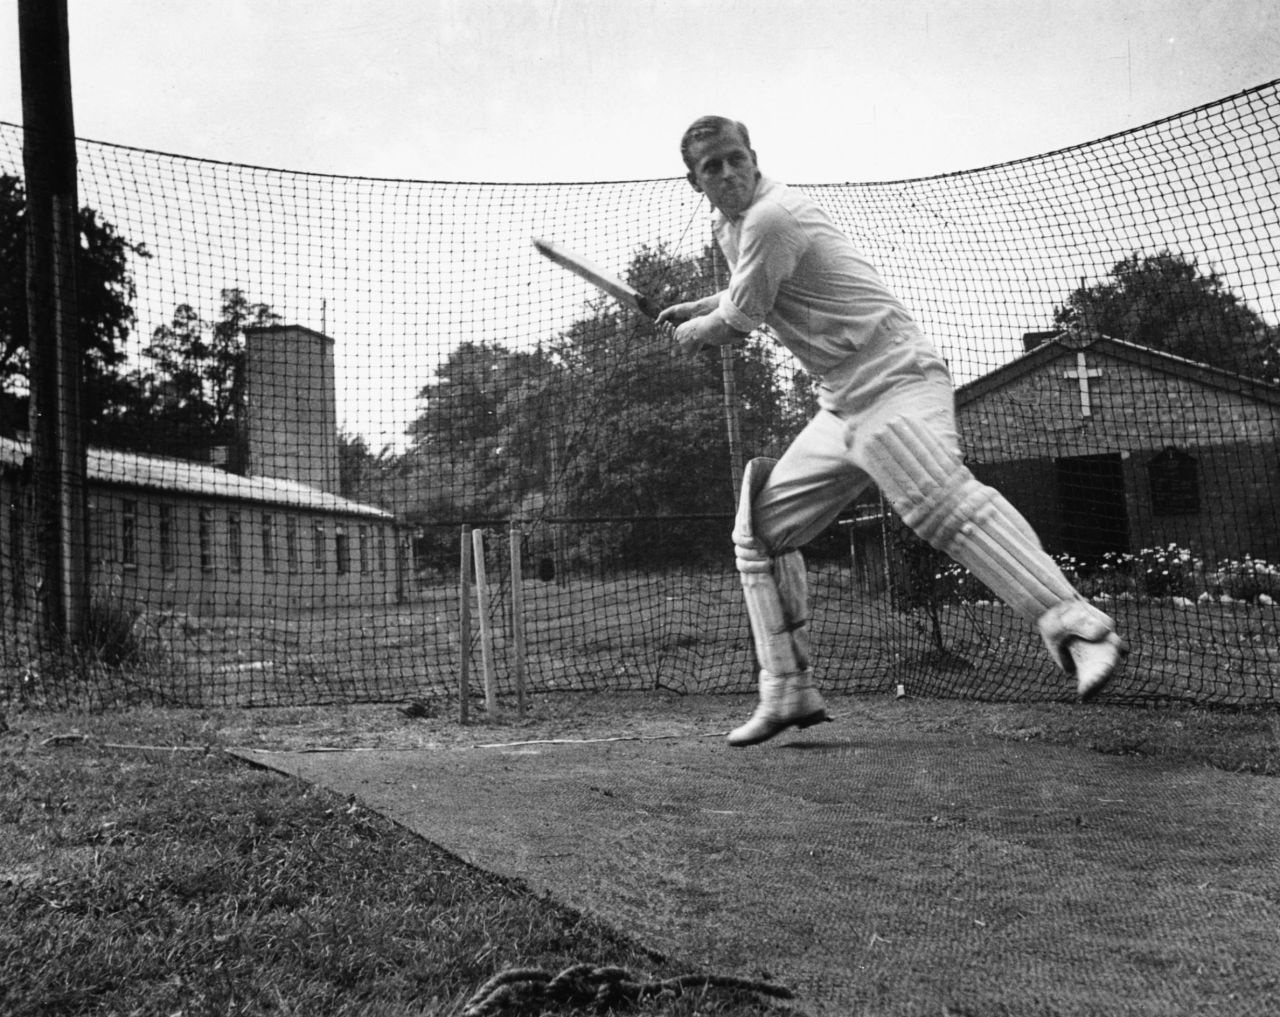 Prince Philip, seen here batting, during cricket practice while in the Royal Navy in 1947.